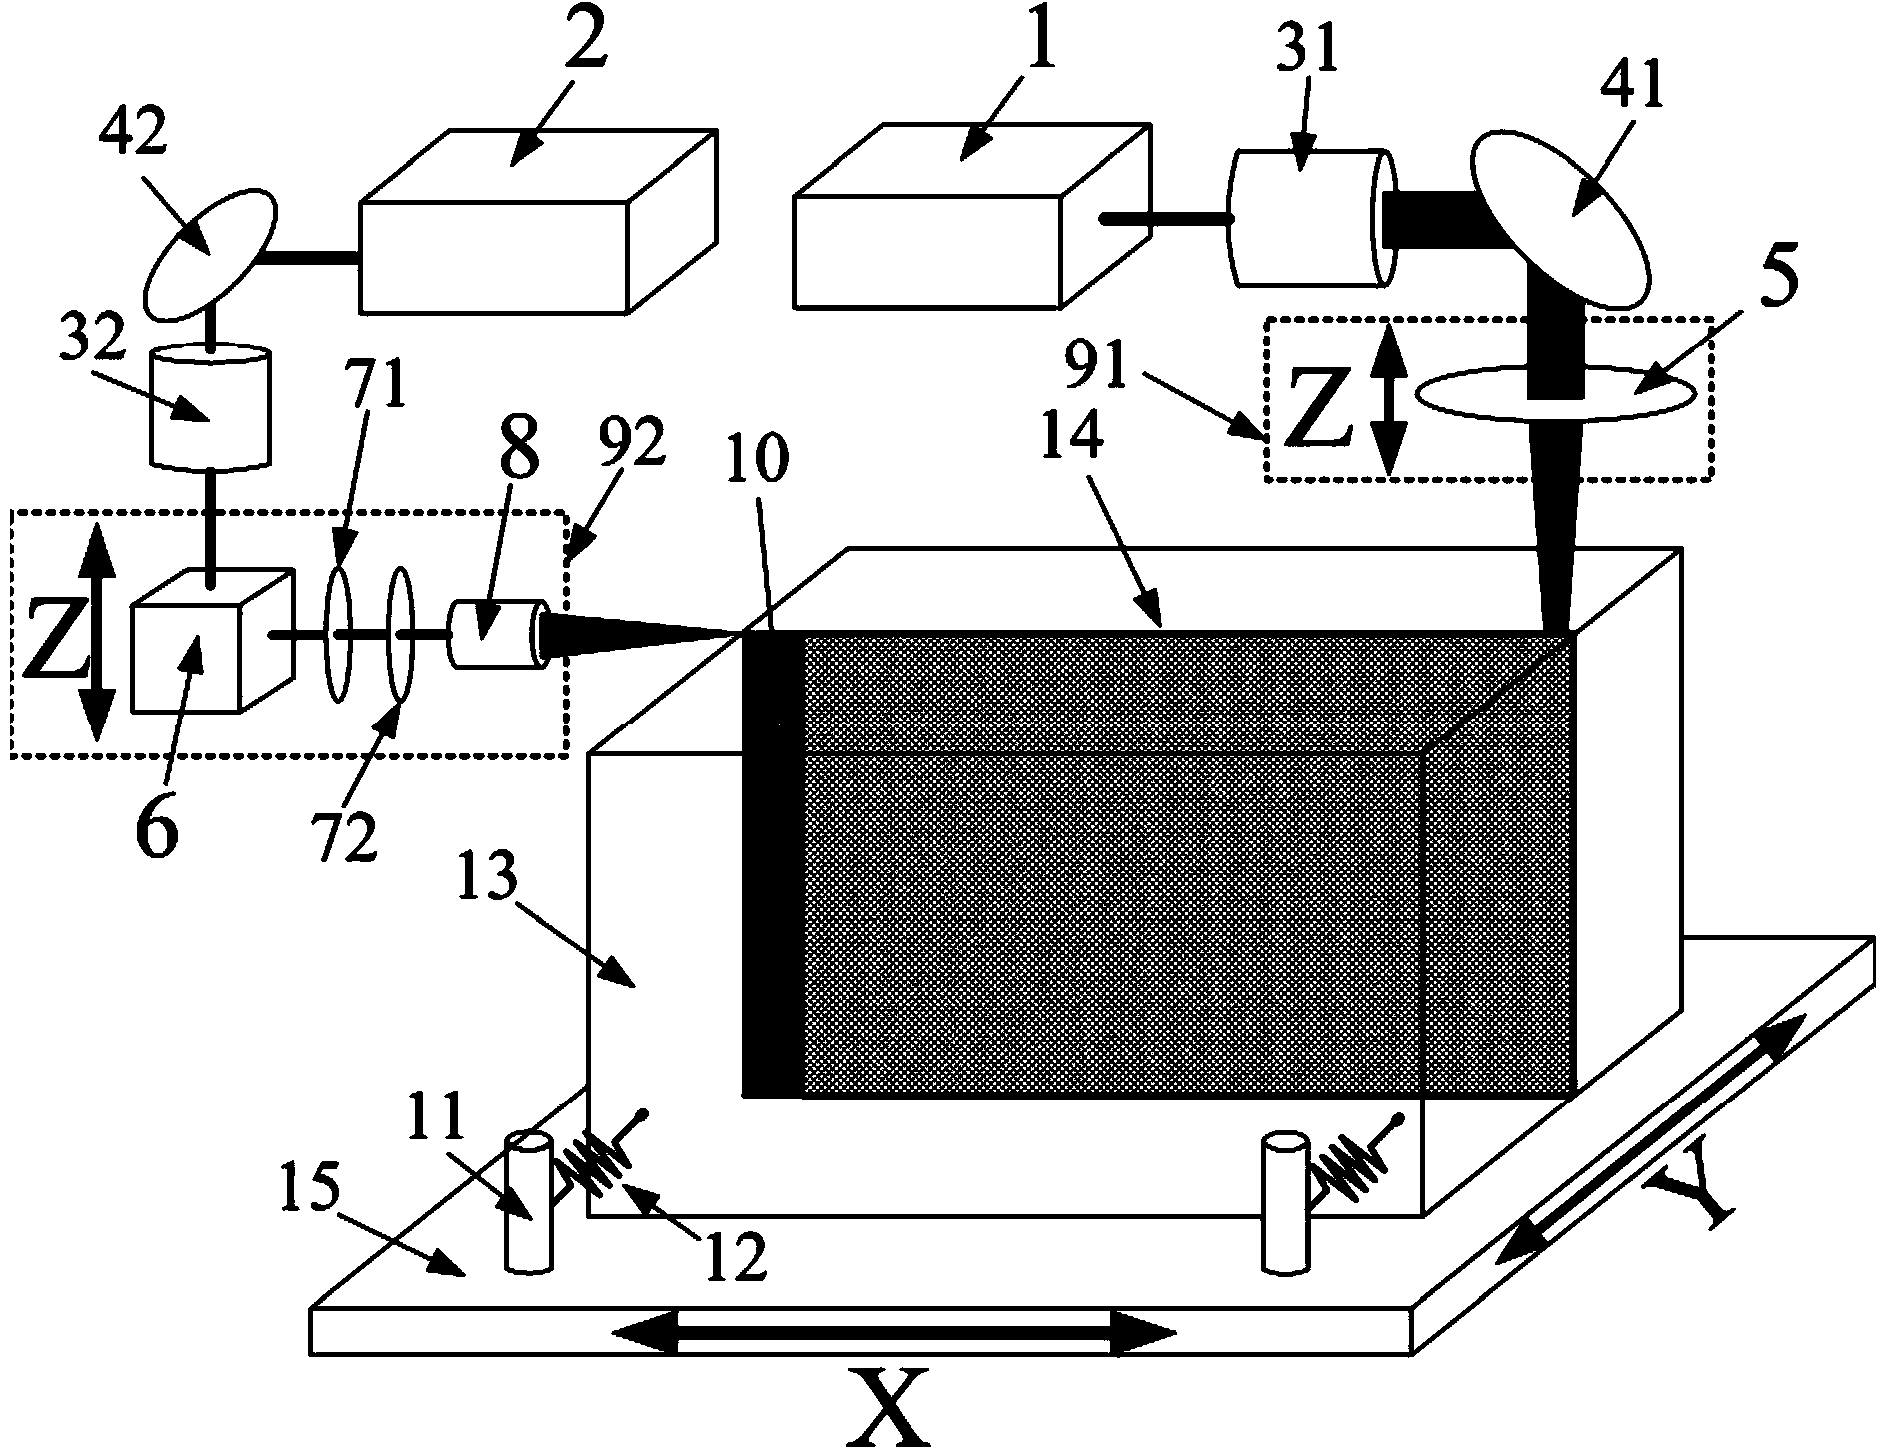 Method and device for quickly separating optical crystals by using laser light